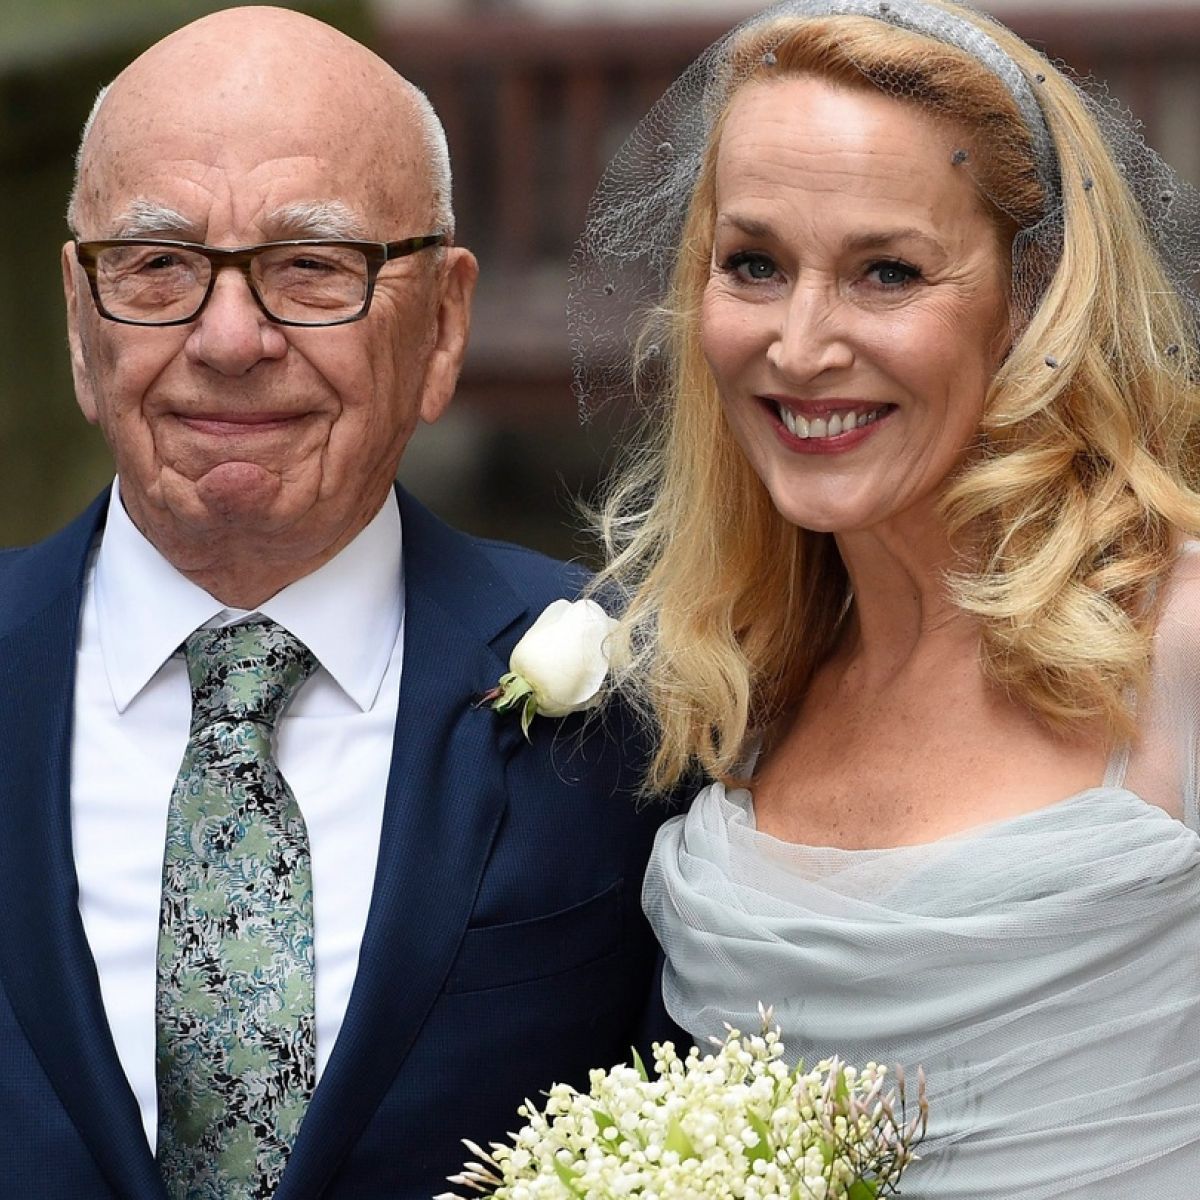 Rupert Murdoch & Priti Patel, don't want you to hear this.At his wedding, she affirmed her cosy relationship. In public she pronounced it by suggesting we're an organised crime group for disrupting & calling out their UK stitch up.But we cannot stay silent, we want to live 